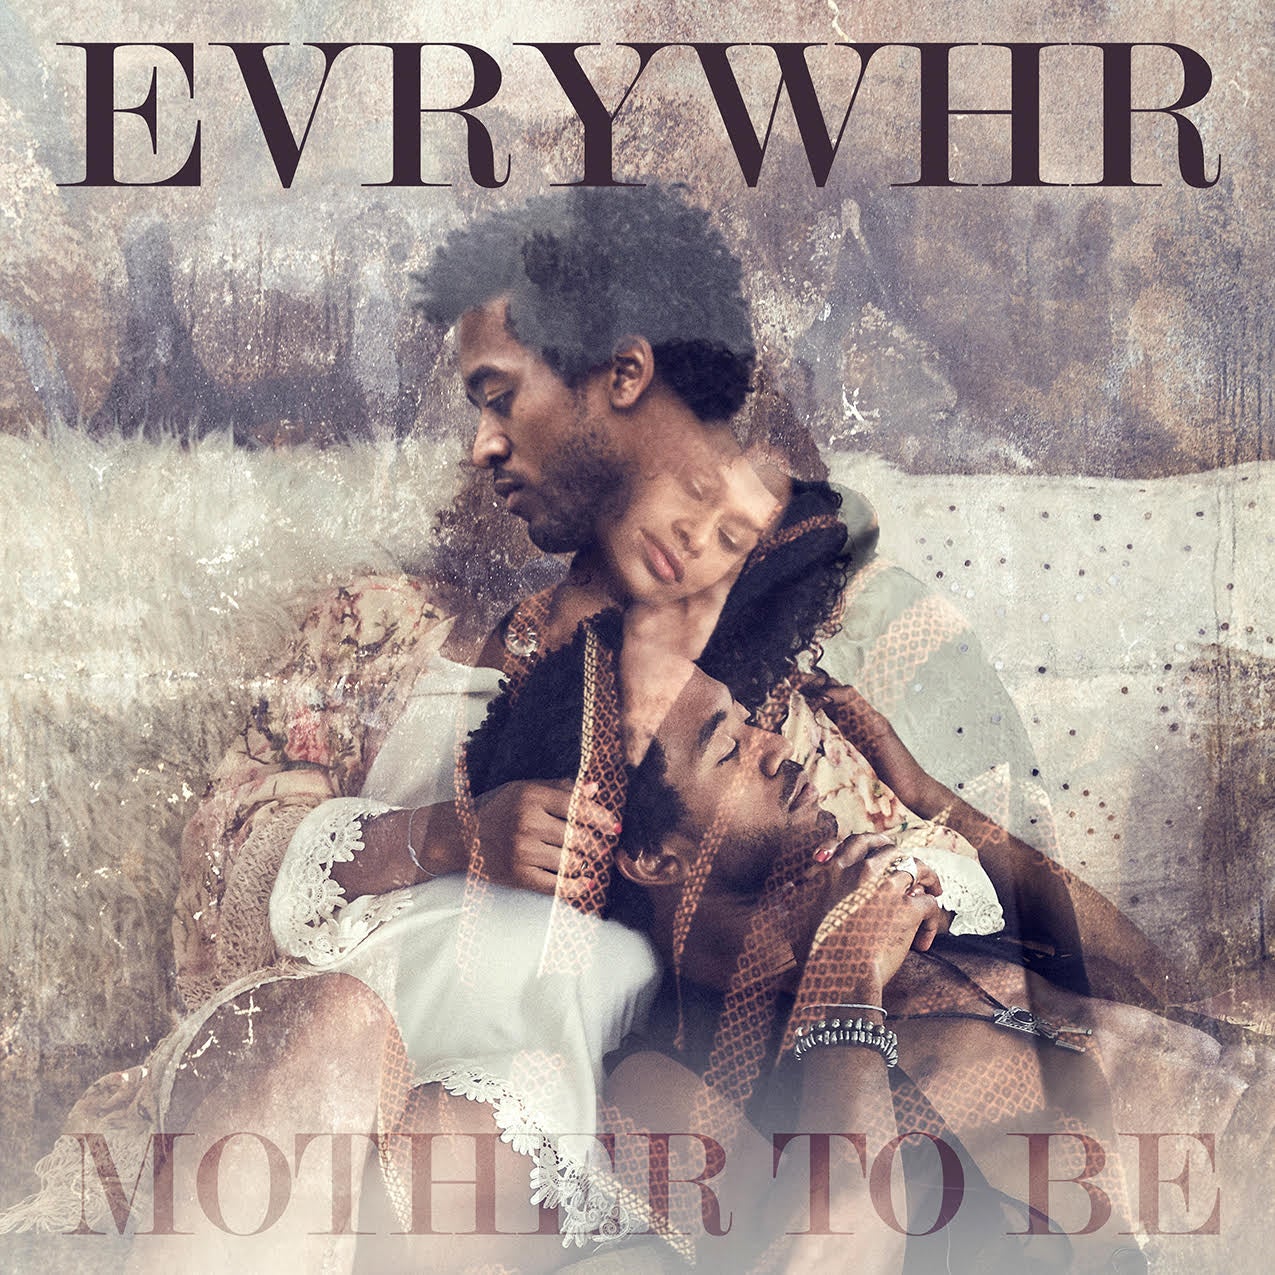 EXCLUSIVE: R&B Artist EVRYWHR Celebrates That Special Someone In His Video For "Mother To Be"
